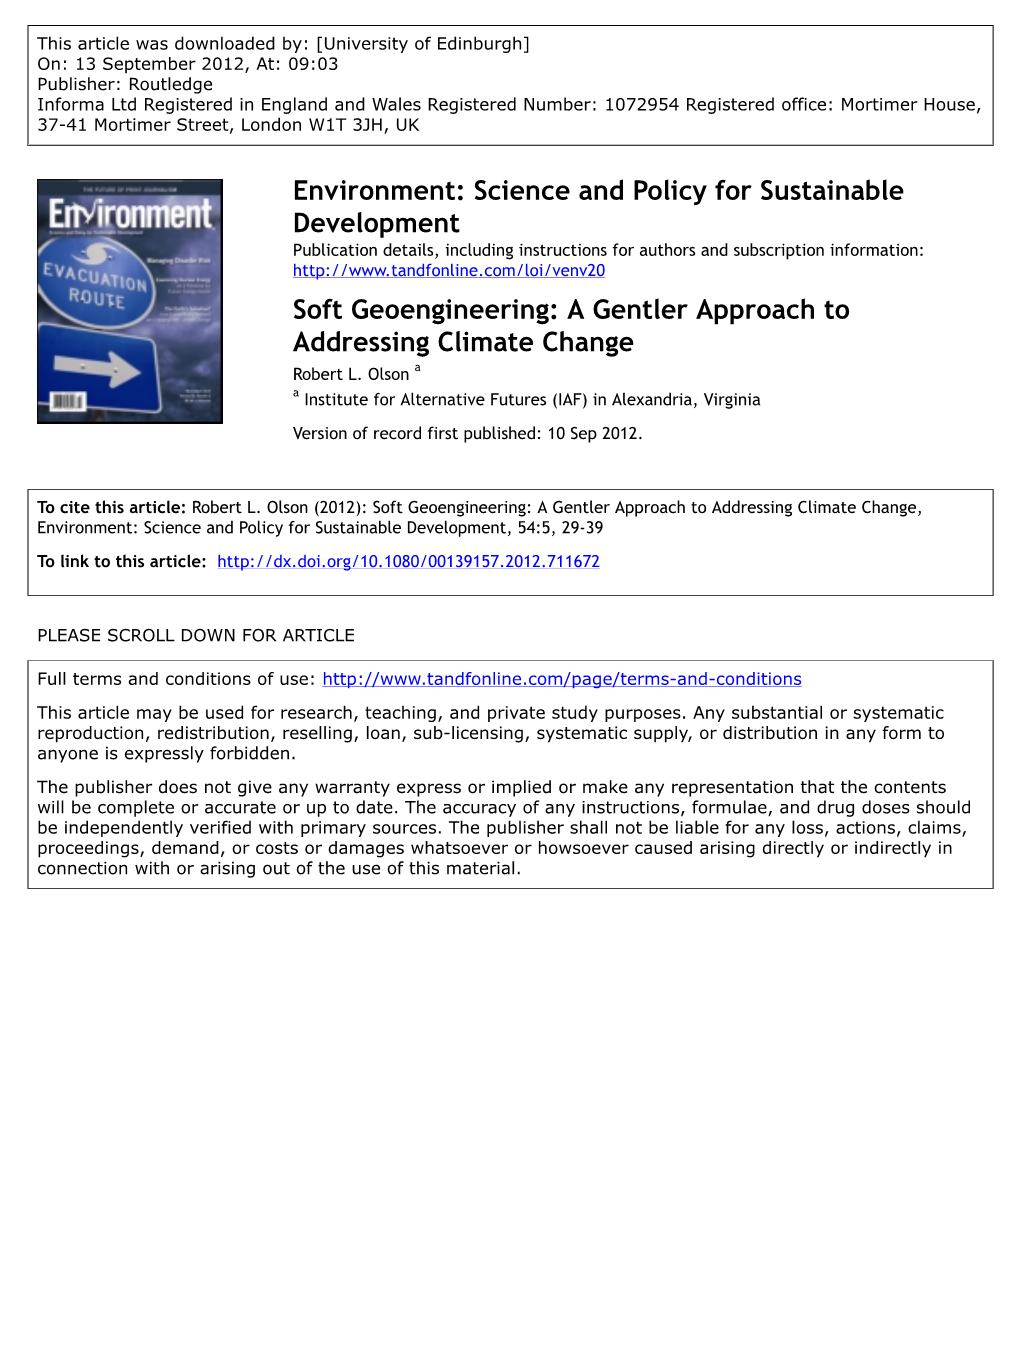 Soft Geoengineering: a Gentler Approach to Addressing Climate Change Robert L